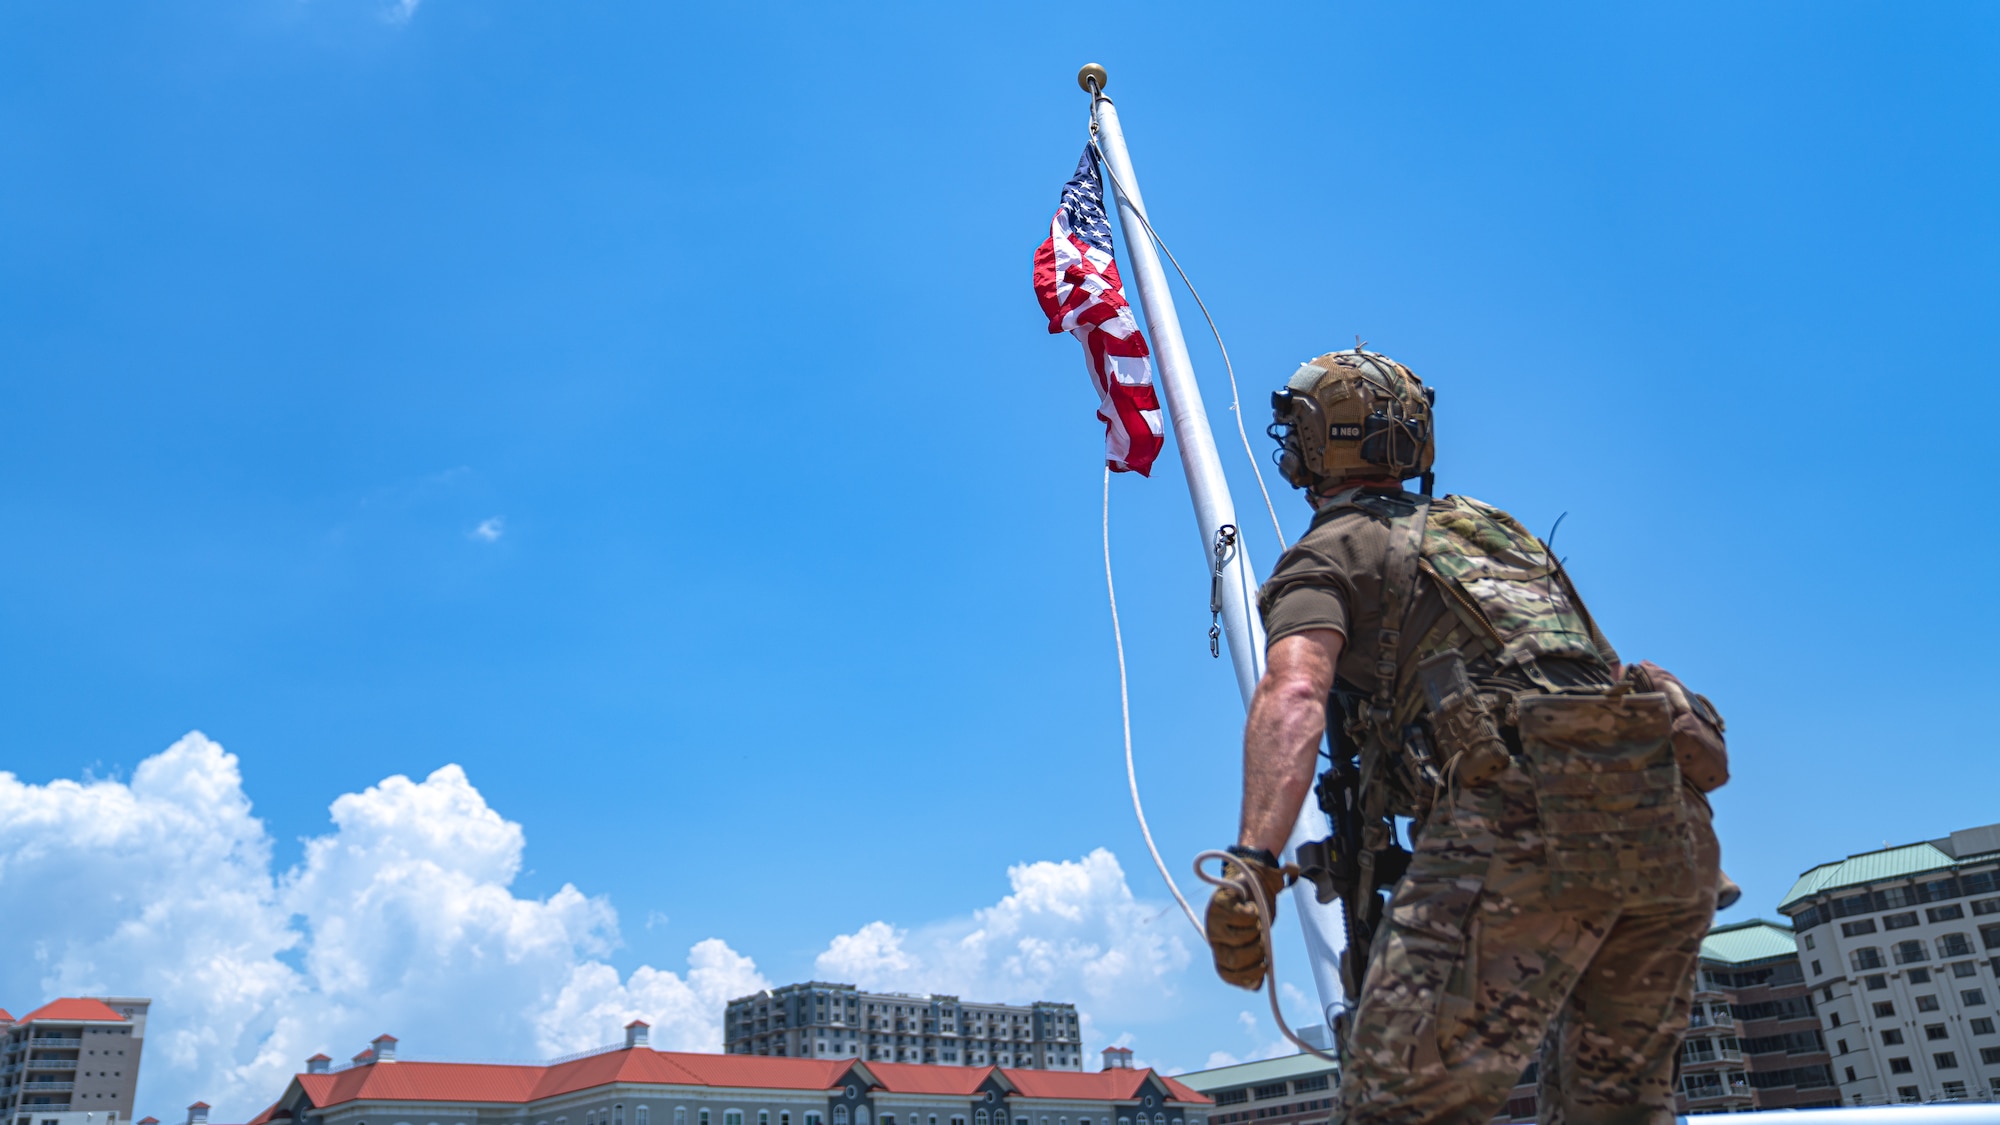 A member assigned to U.S. Special Operations Command hoists an American flag on a boat during a Special Operations Forces (SOF) demonstration in Downtown Tampa, Florida, May 18, 2022.